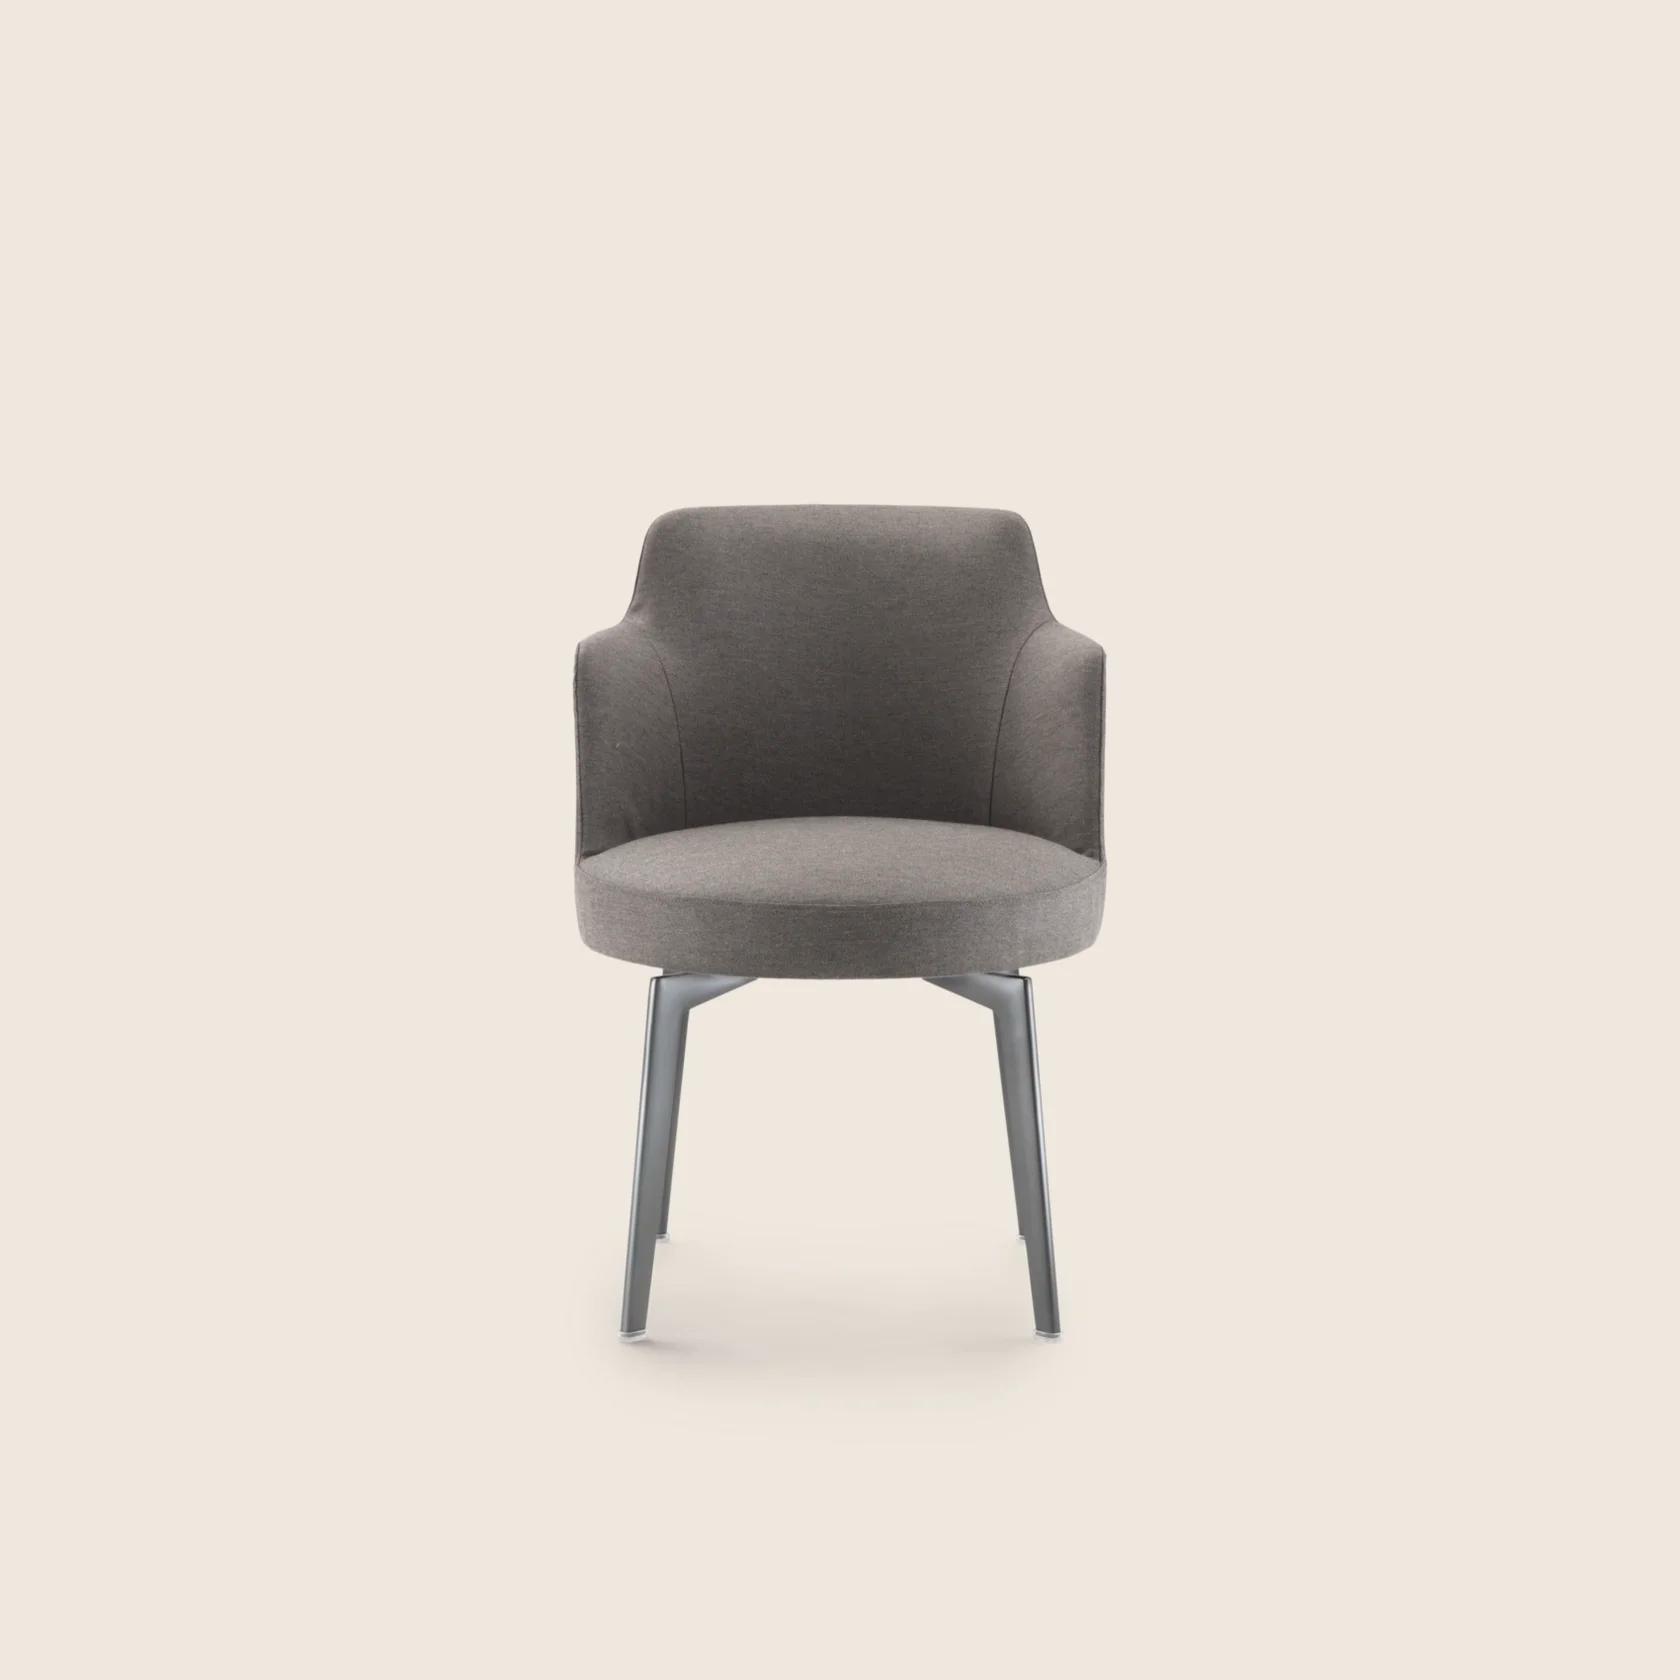 024601_HERA_CHAIR_02.png